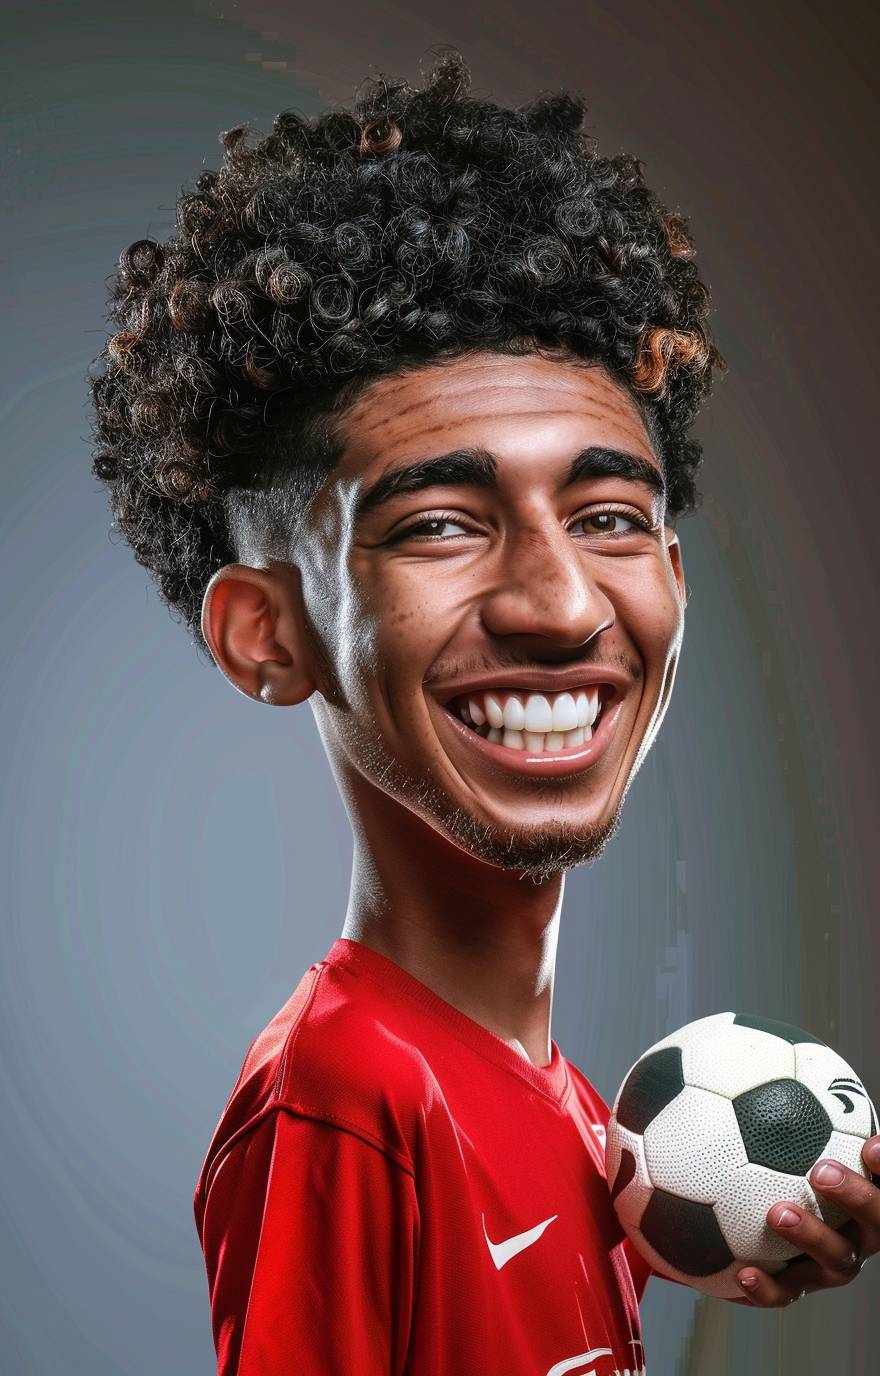 Photorealistic Jude Bellingham playing soccer, smiling, big head caricature